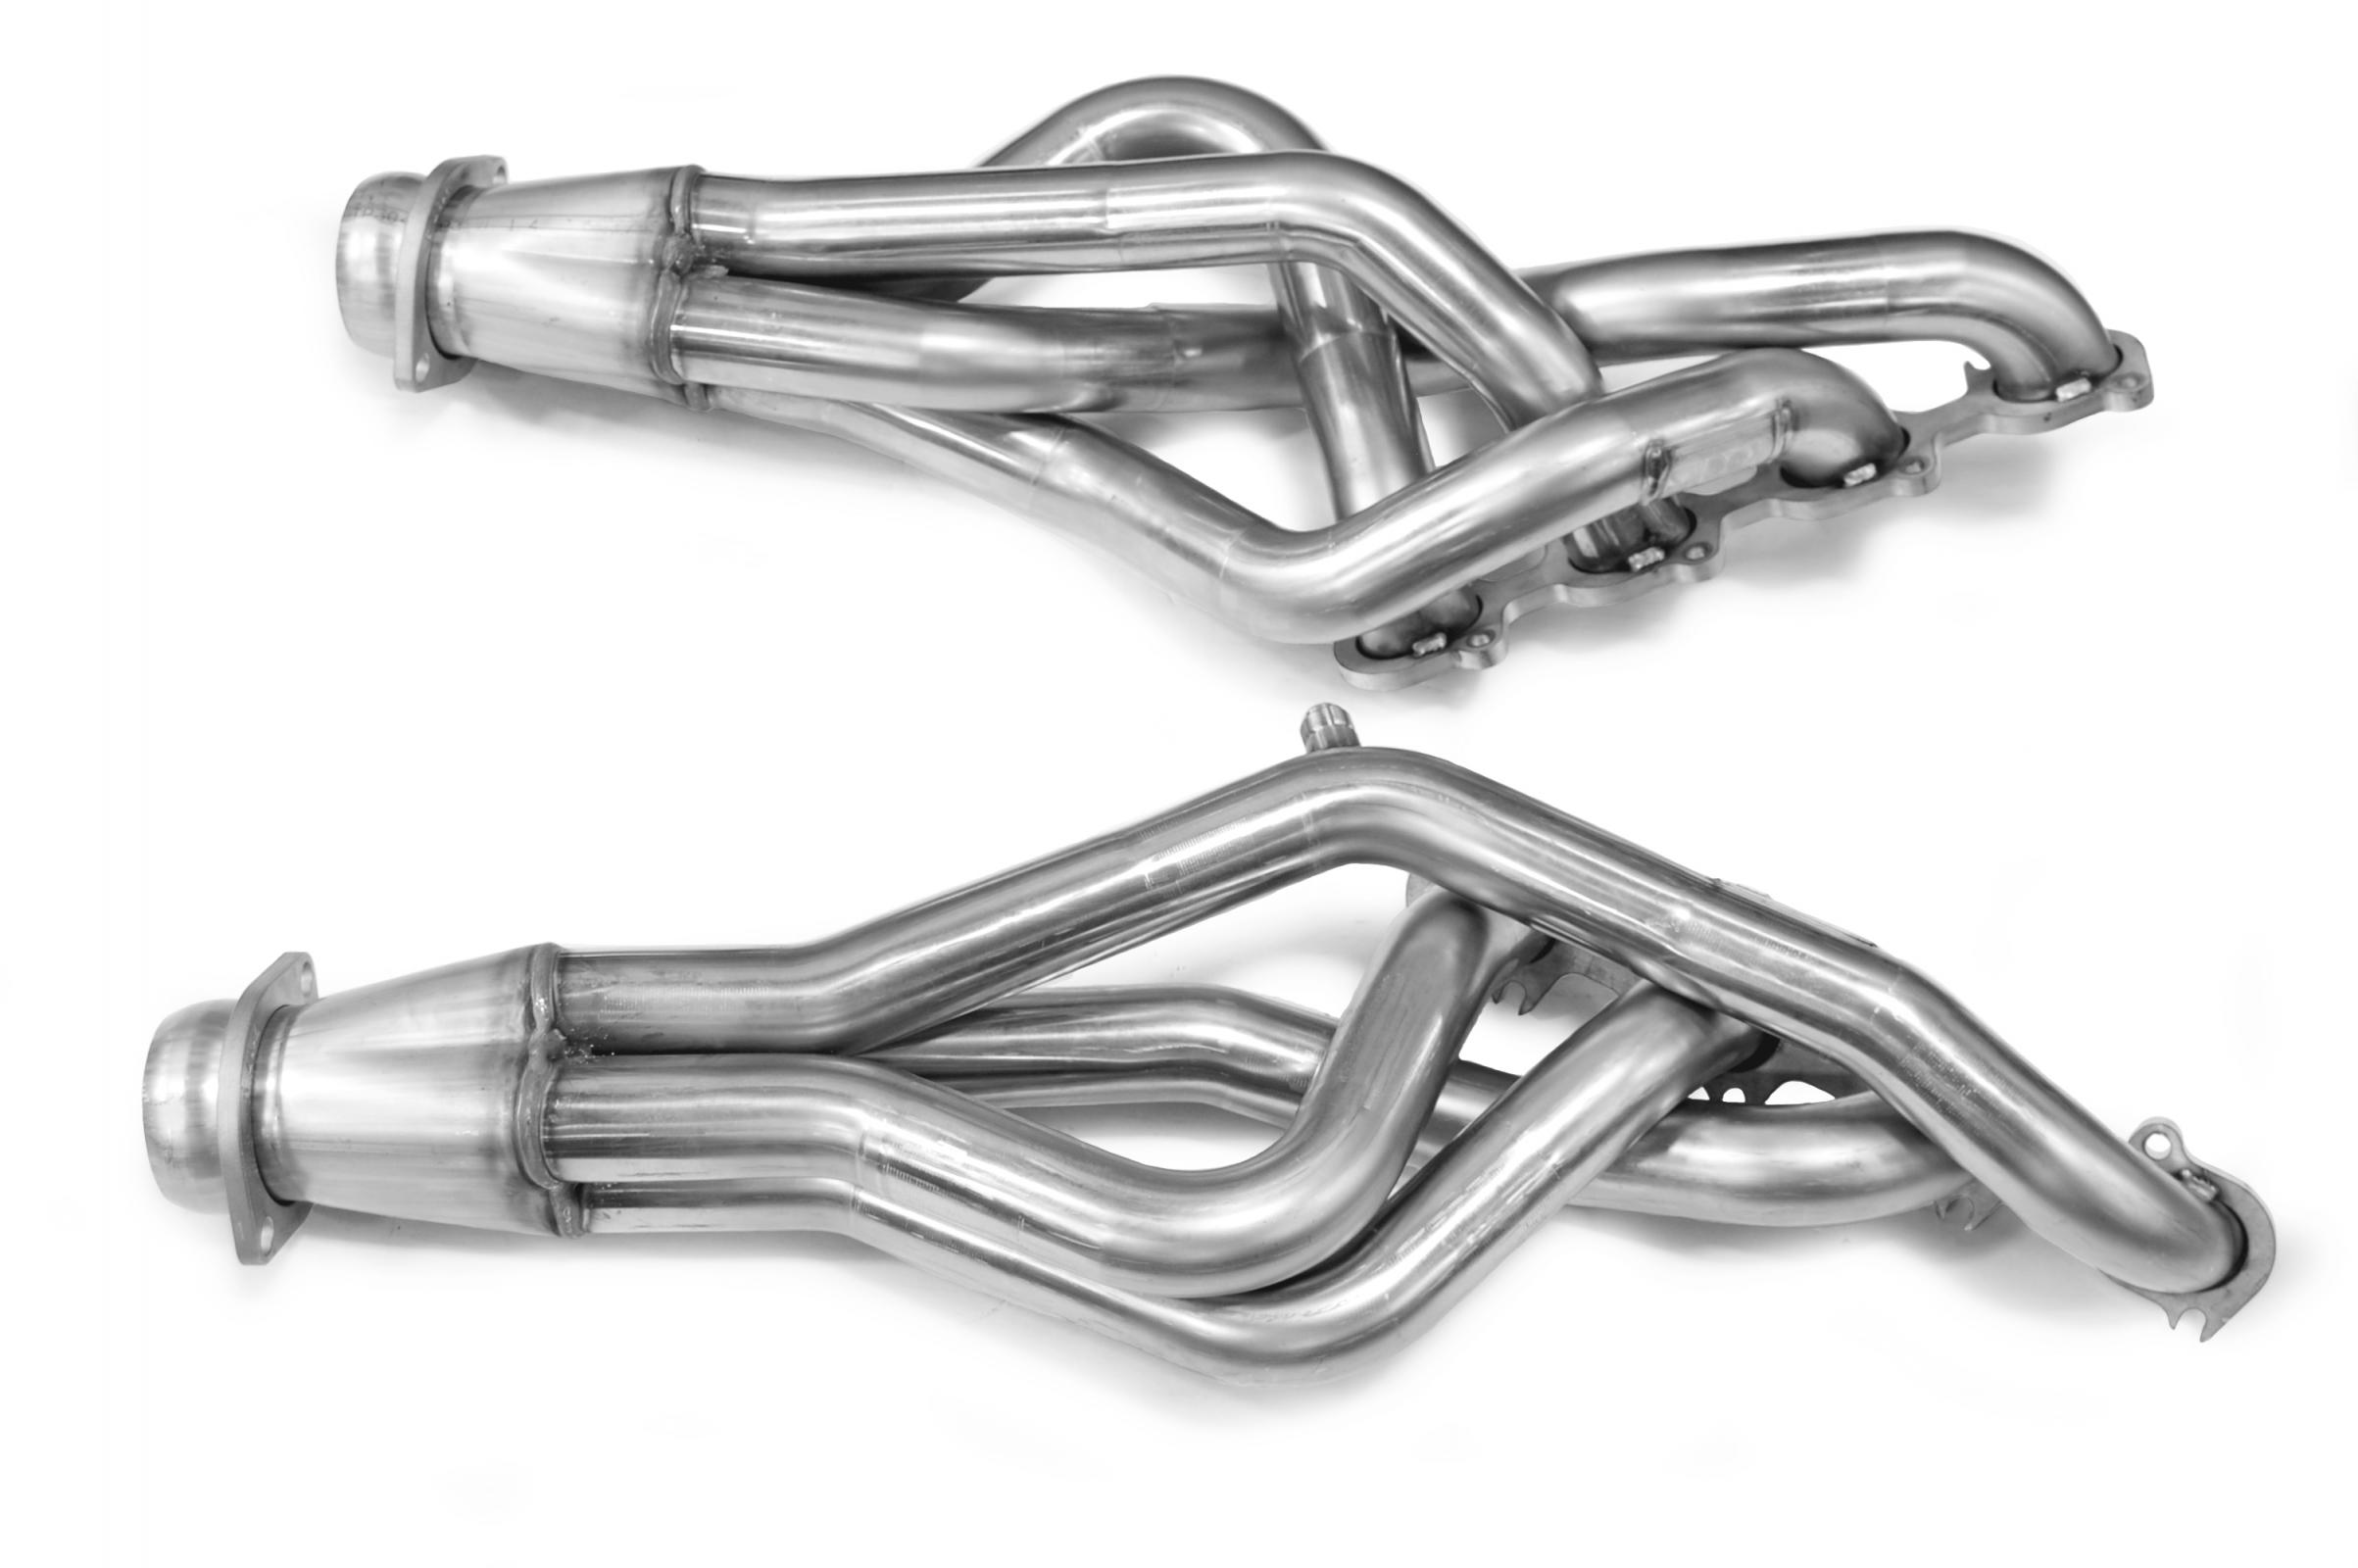 Stainless Steel Headers 1.875 x 3" Collector Incl. 1 Pr. 12" O2 Extension Harness